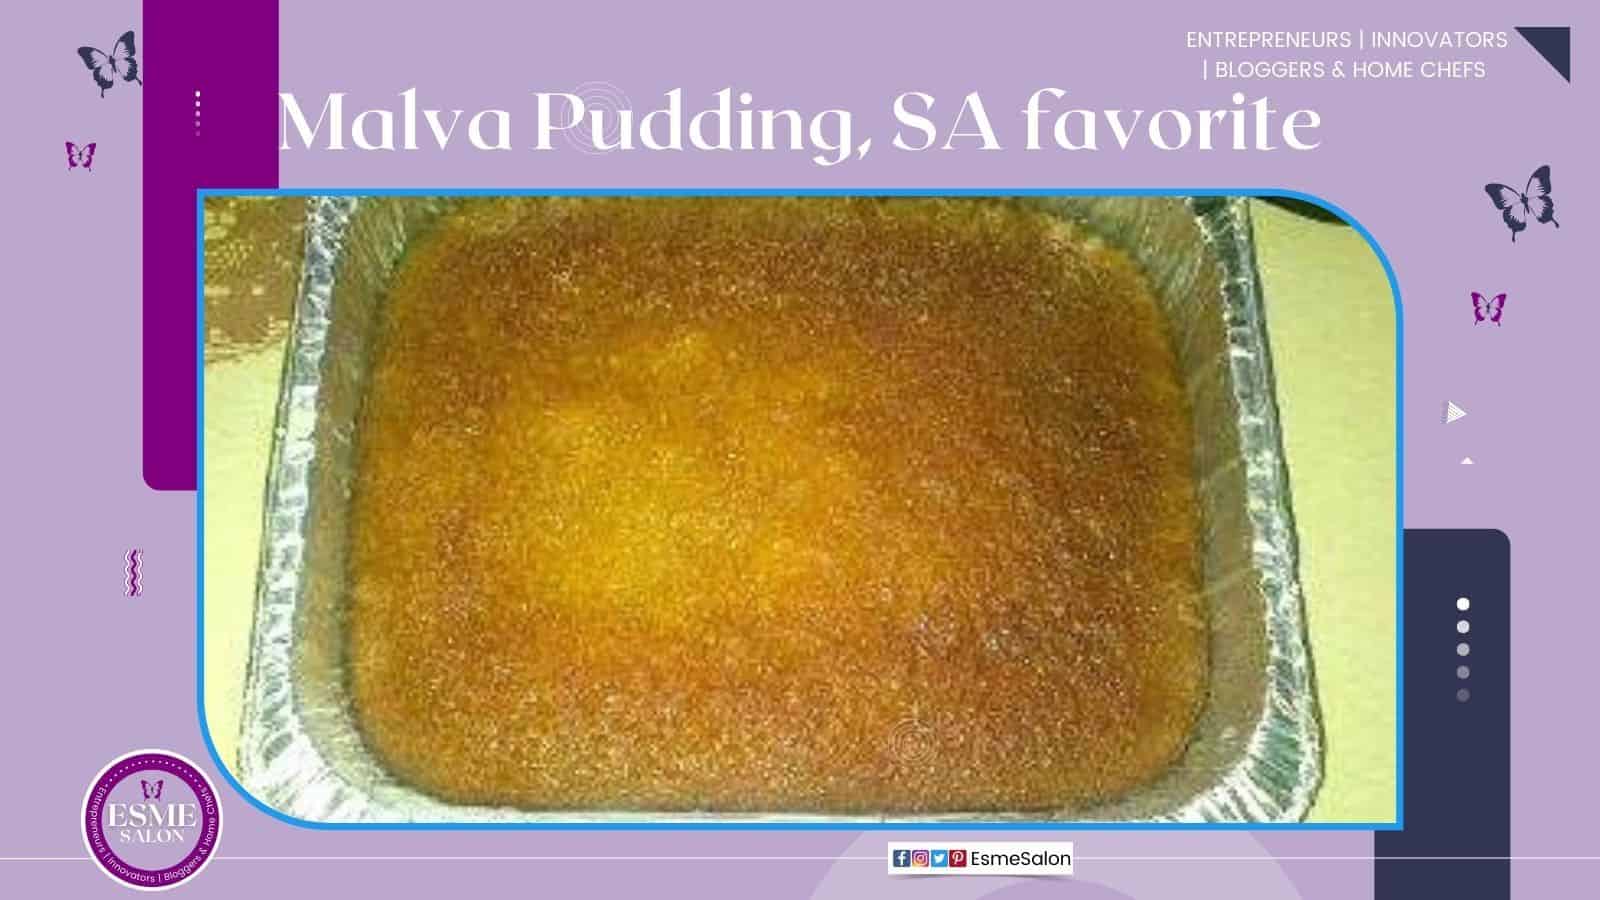 An image of a brown baked pudding with rich creamy sauce that seeped into the dough